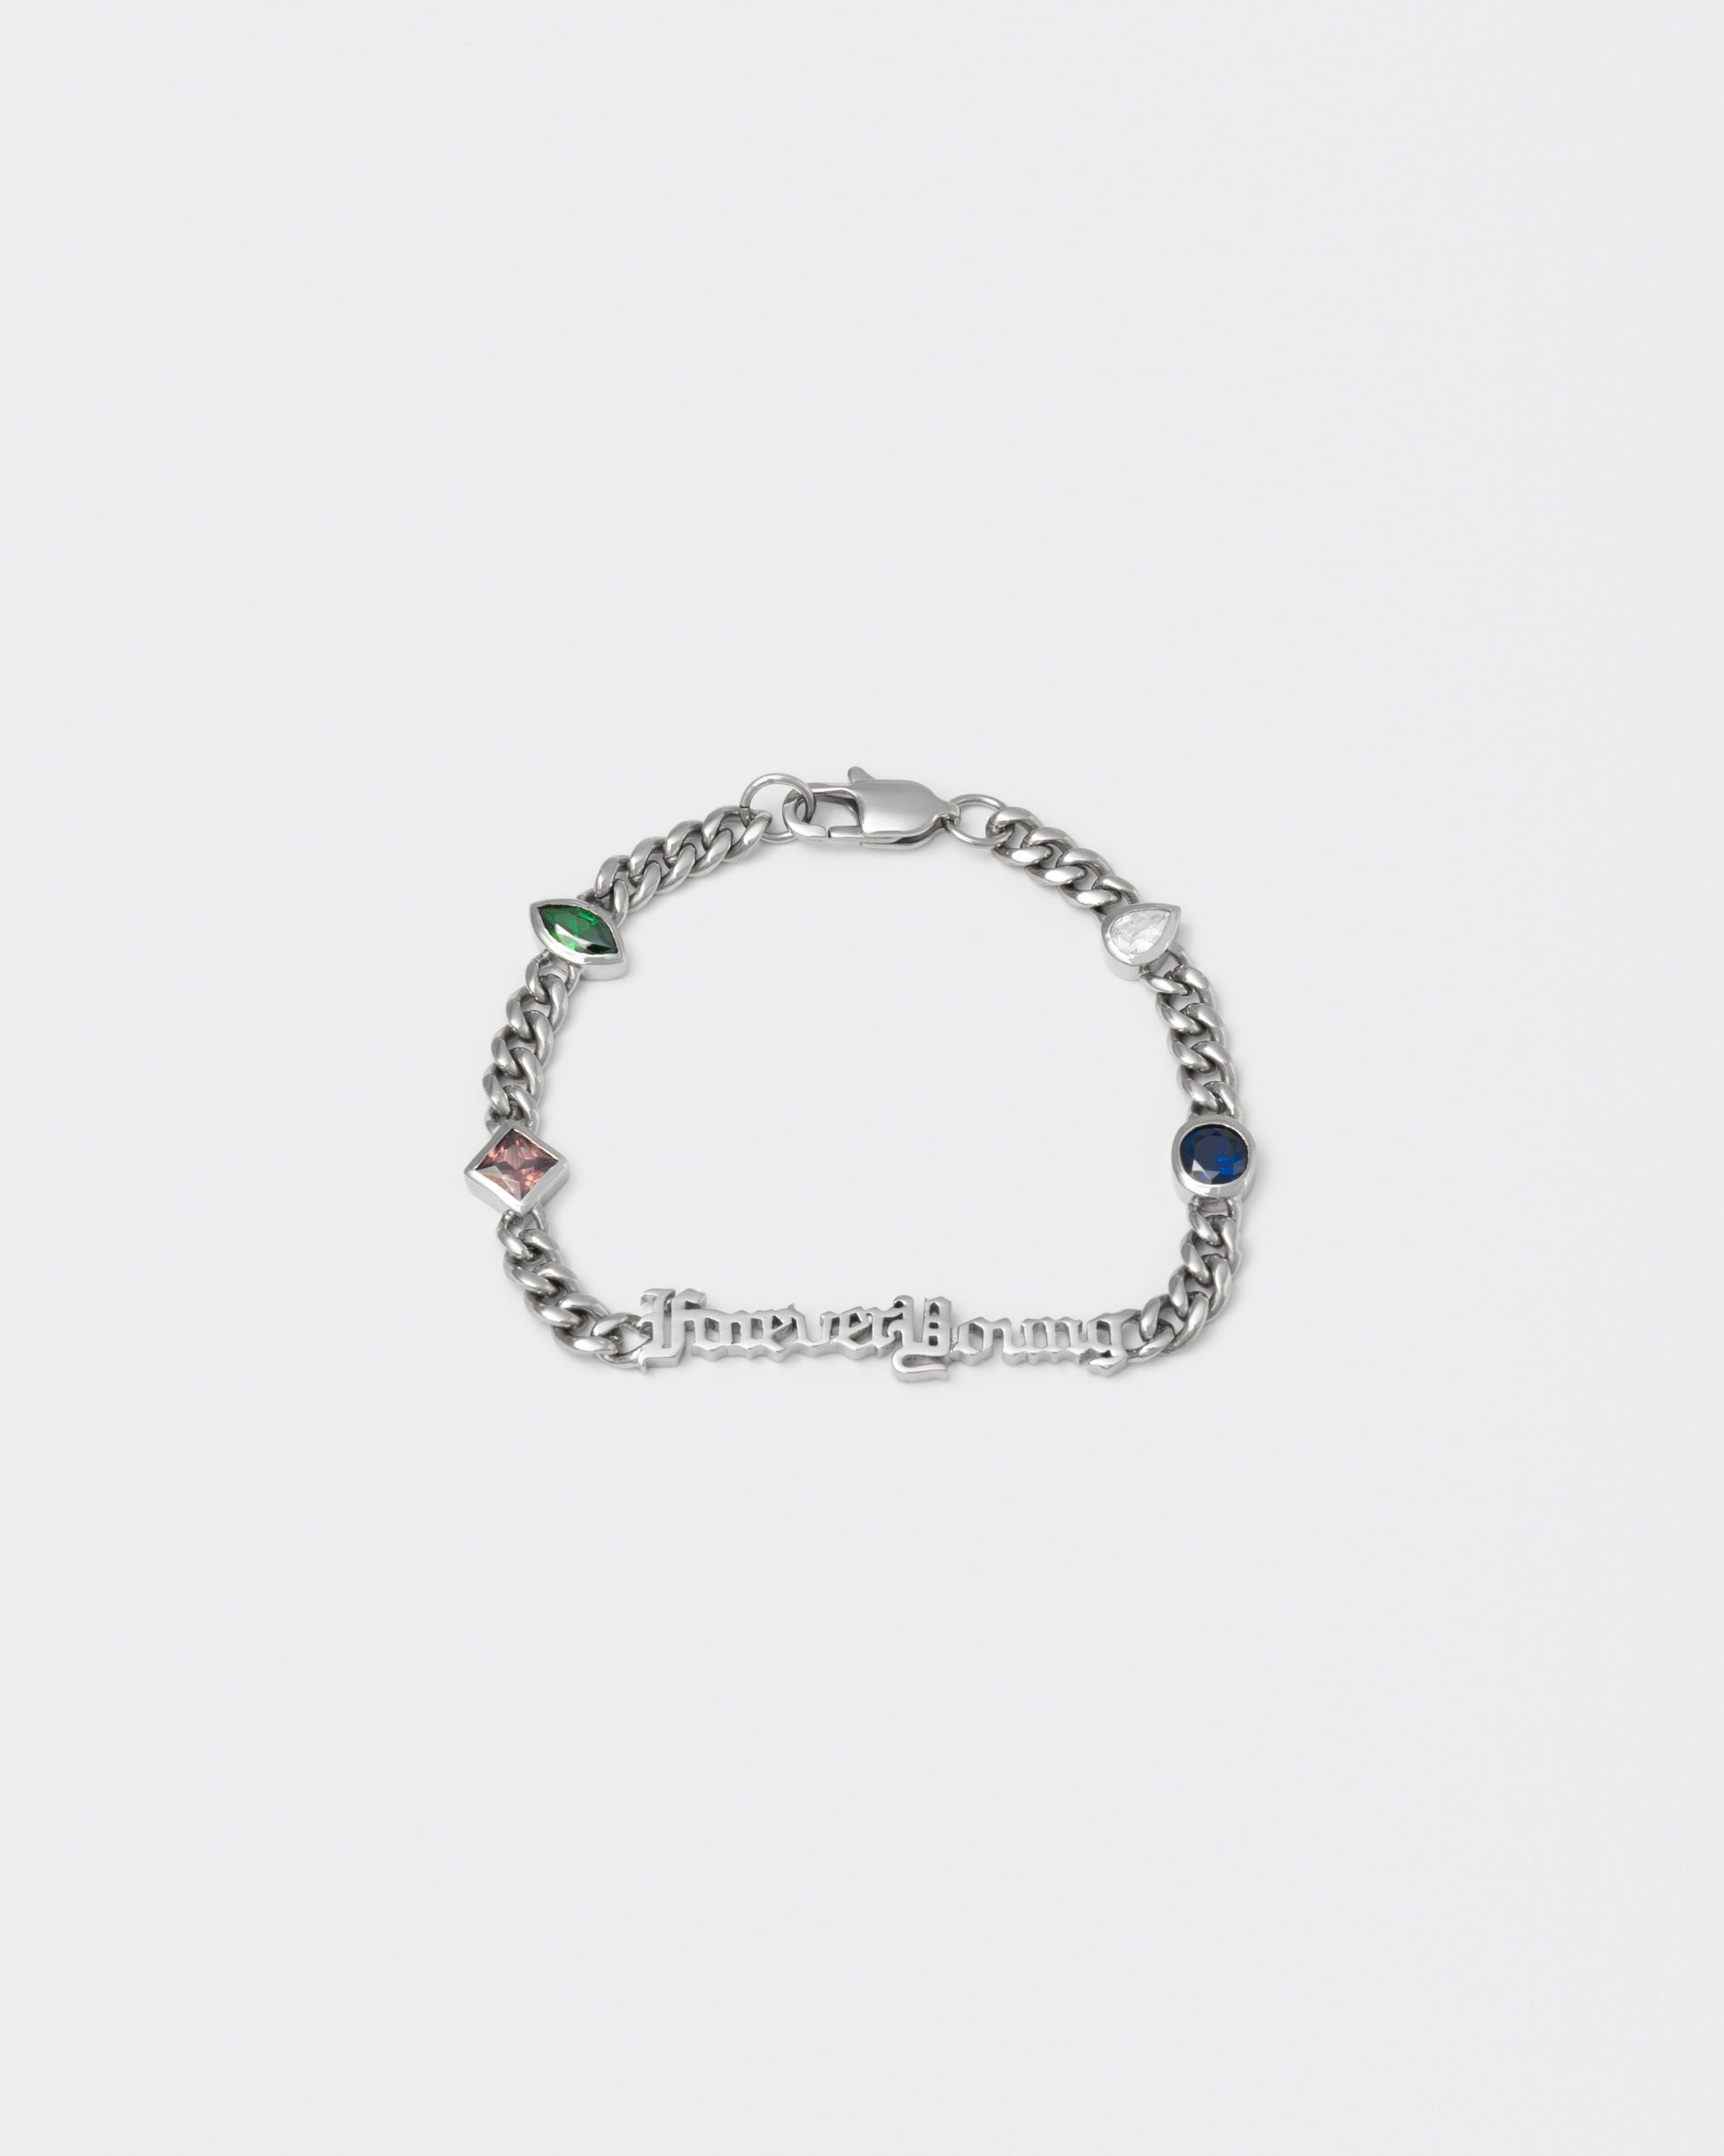 Forever Young cuban chain bracelet with 18kt white gold coating, mixed shape bezel stones in diamond white, burna blue, green, chocolate and "Forever Young" central metal tag